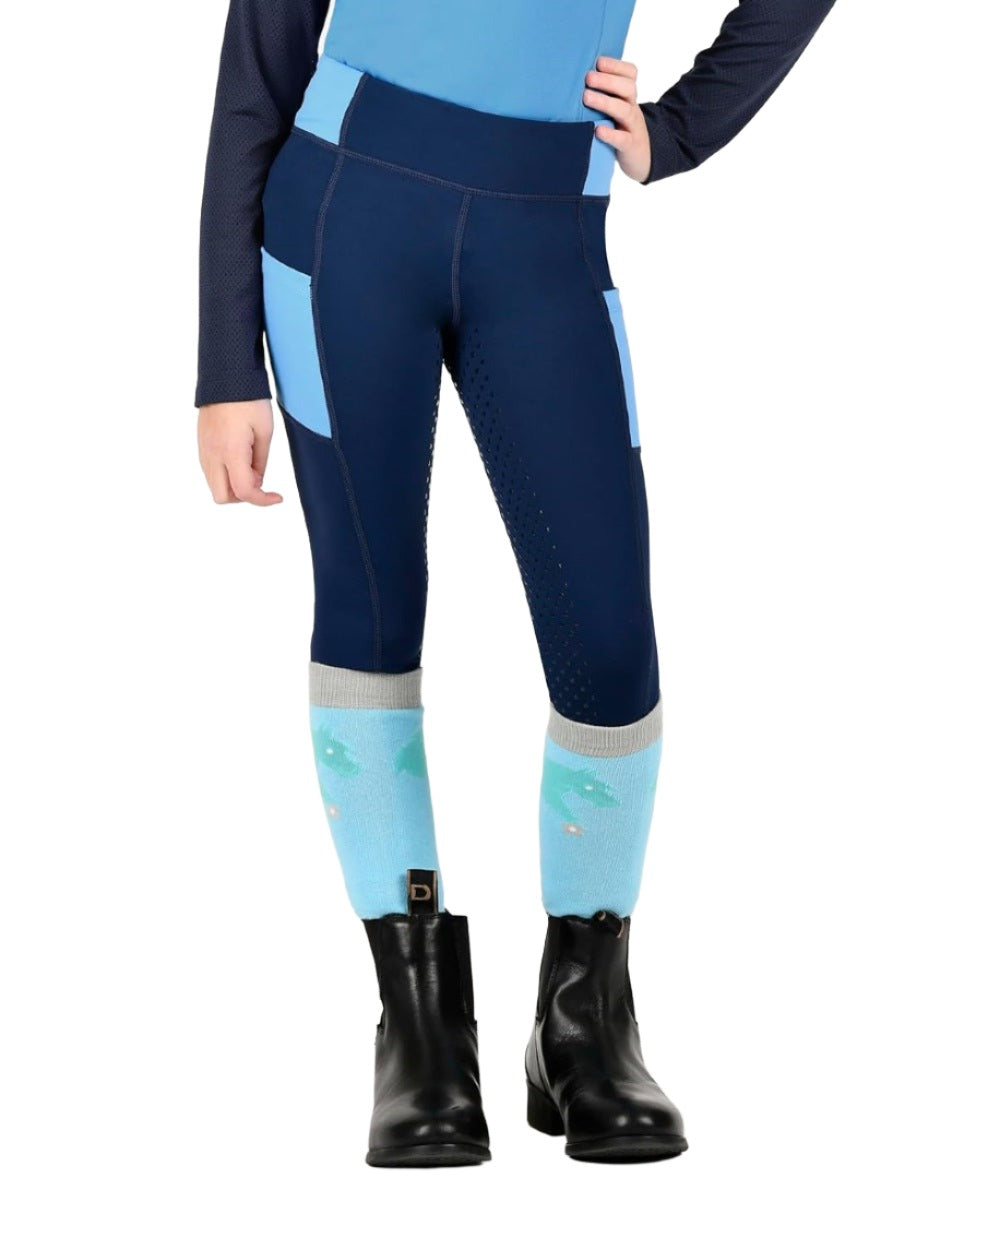 Naval Academy Coastal Blue coloured Dublin Childrens Everyday Riding Tights on white background 